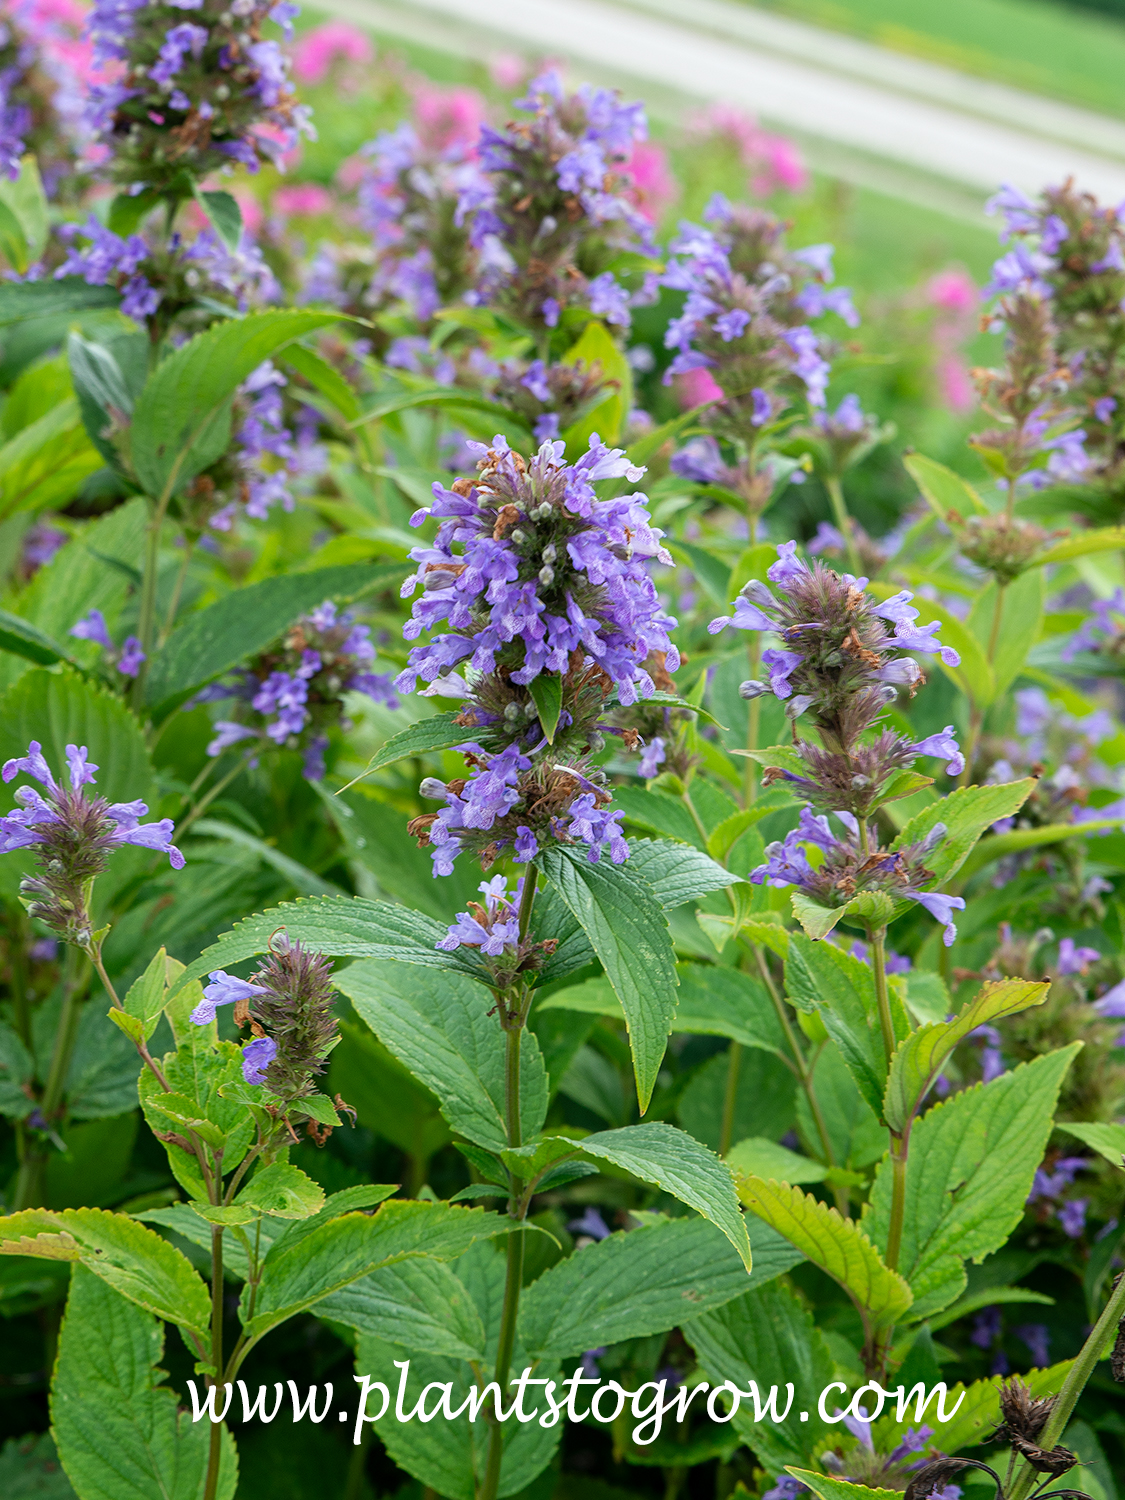 Prelude Blue Catmint (Nepeta subsessile)
(July 27)